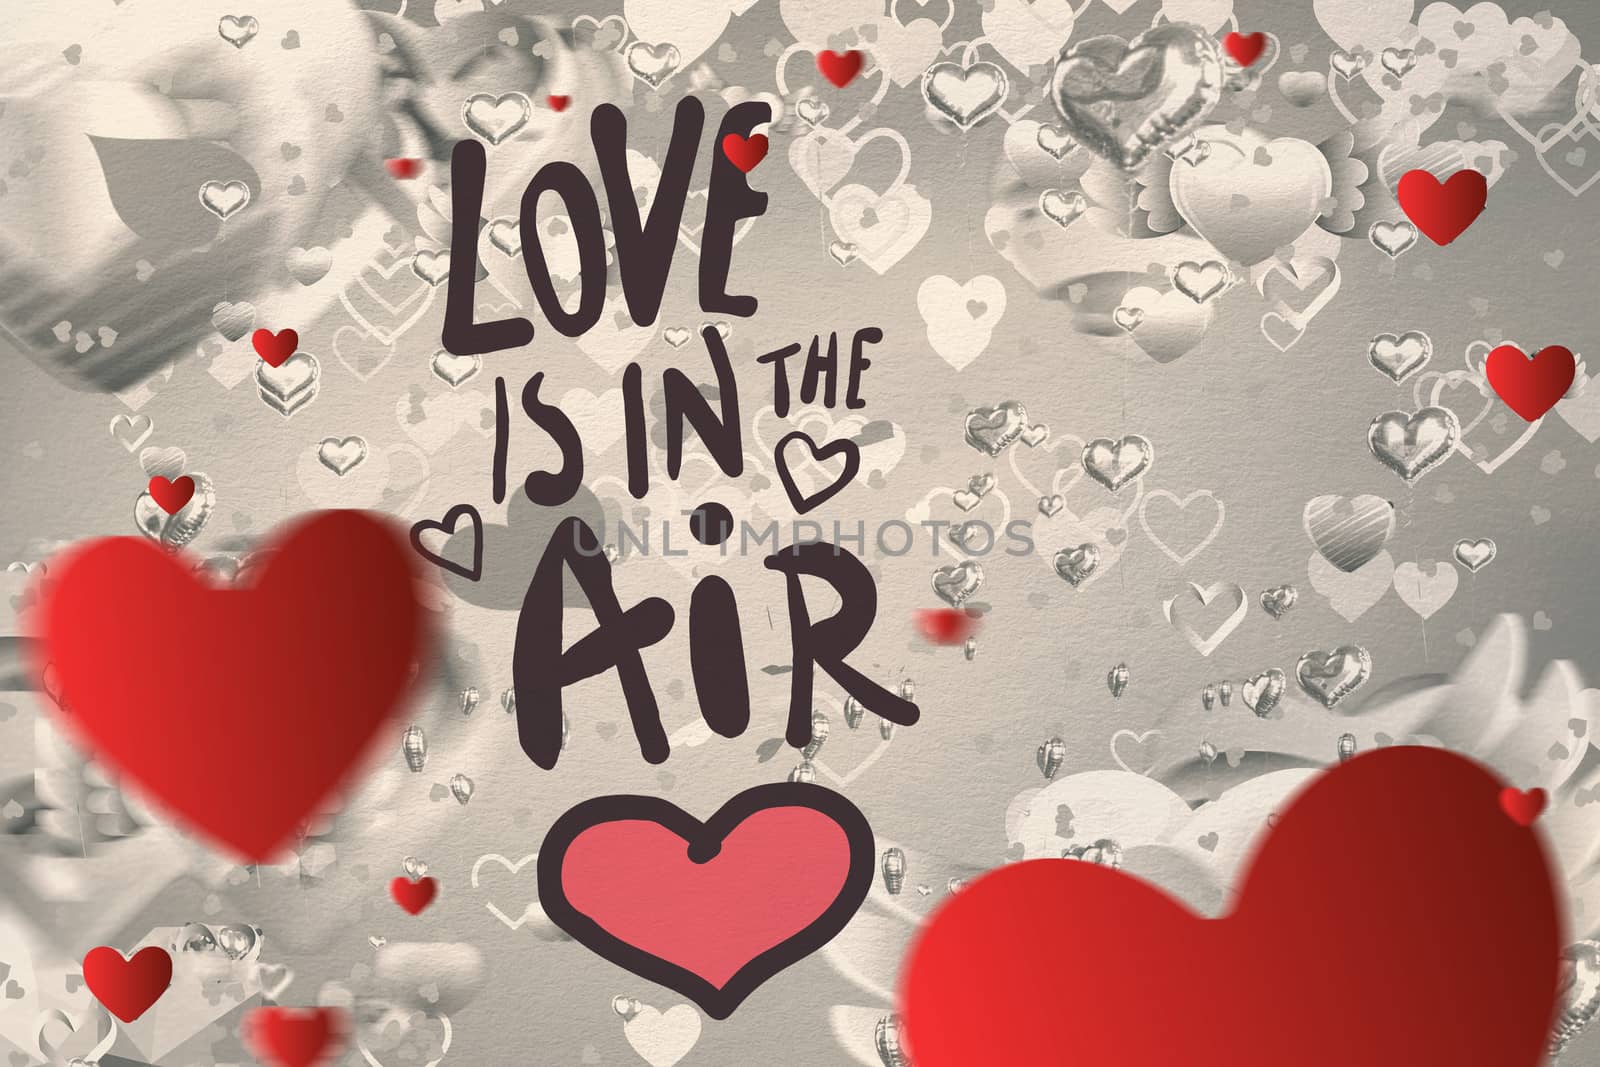 Composite image of valentines message with hearts